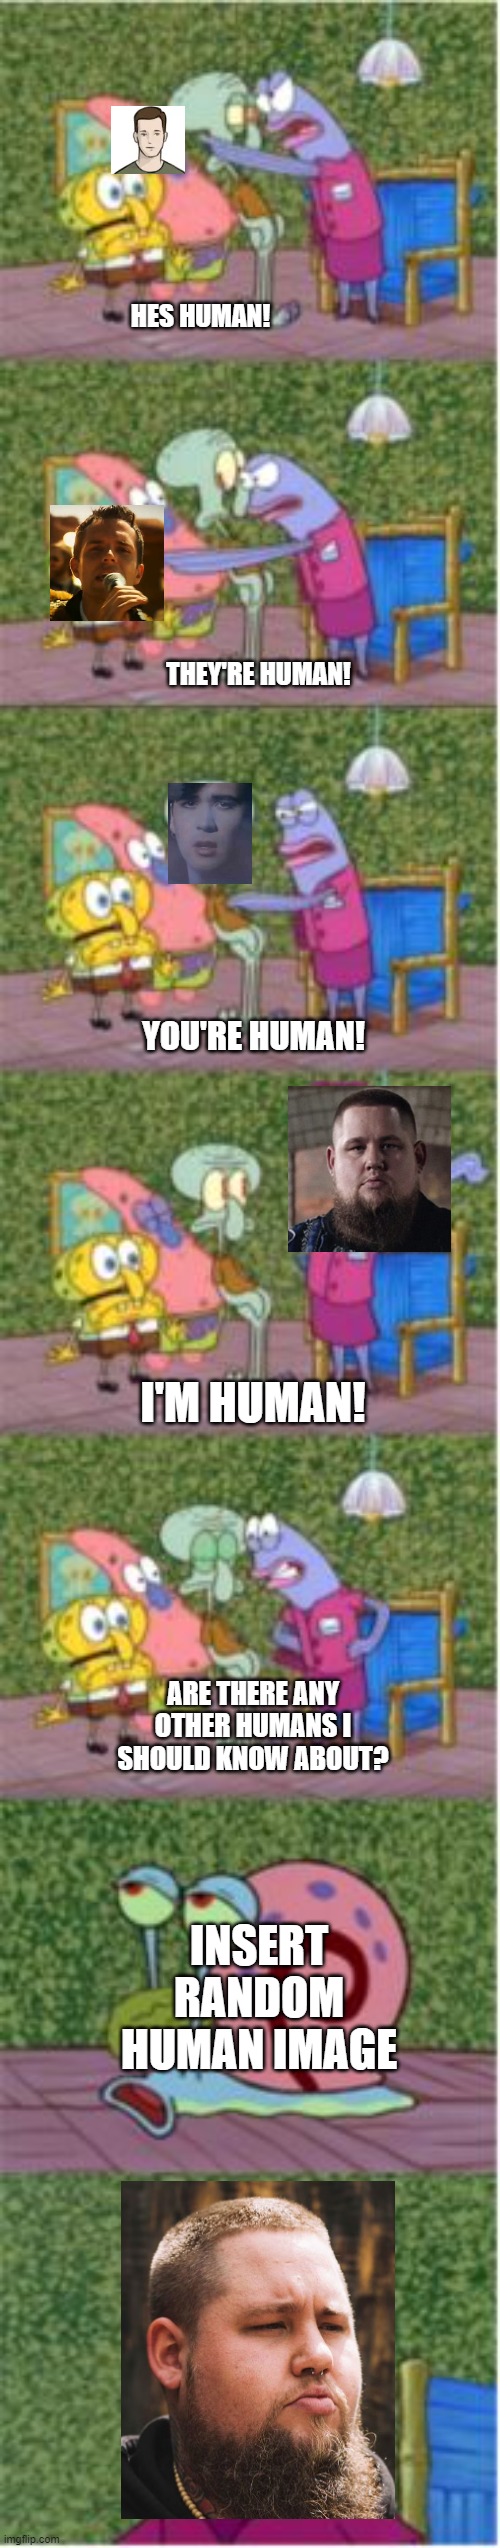 A human meme |  HES HUMAN! THEY'RE HUMAN! YOU'RE HUMAN! I'M HUMAN! ARE THERE ANY OTHER HUMANS I SHOULD KNOW ABOUT? INSERT RANDOM HUMAN IMAGE | image tagged in he's squidward,spongebob,human,music | made w/ Imgflip meme maker